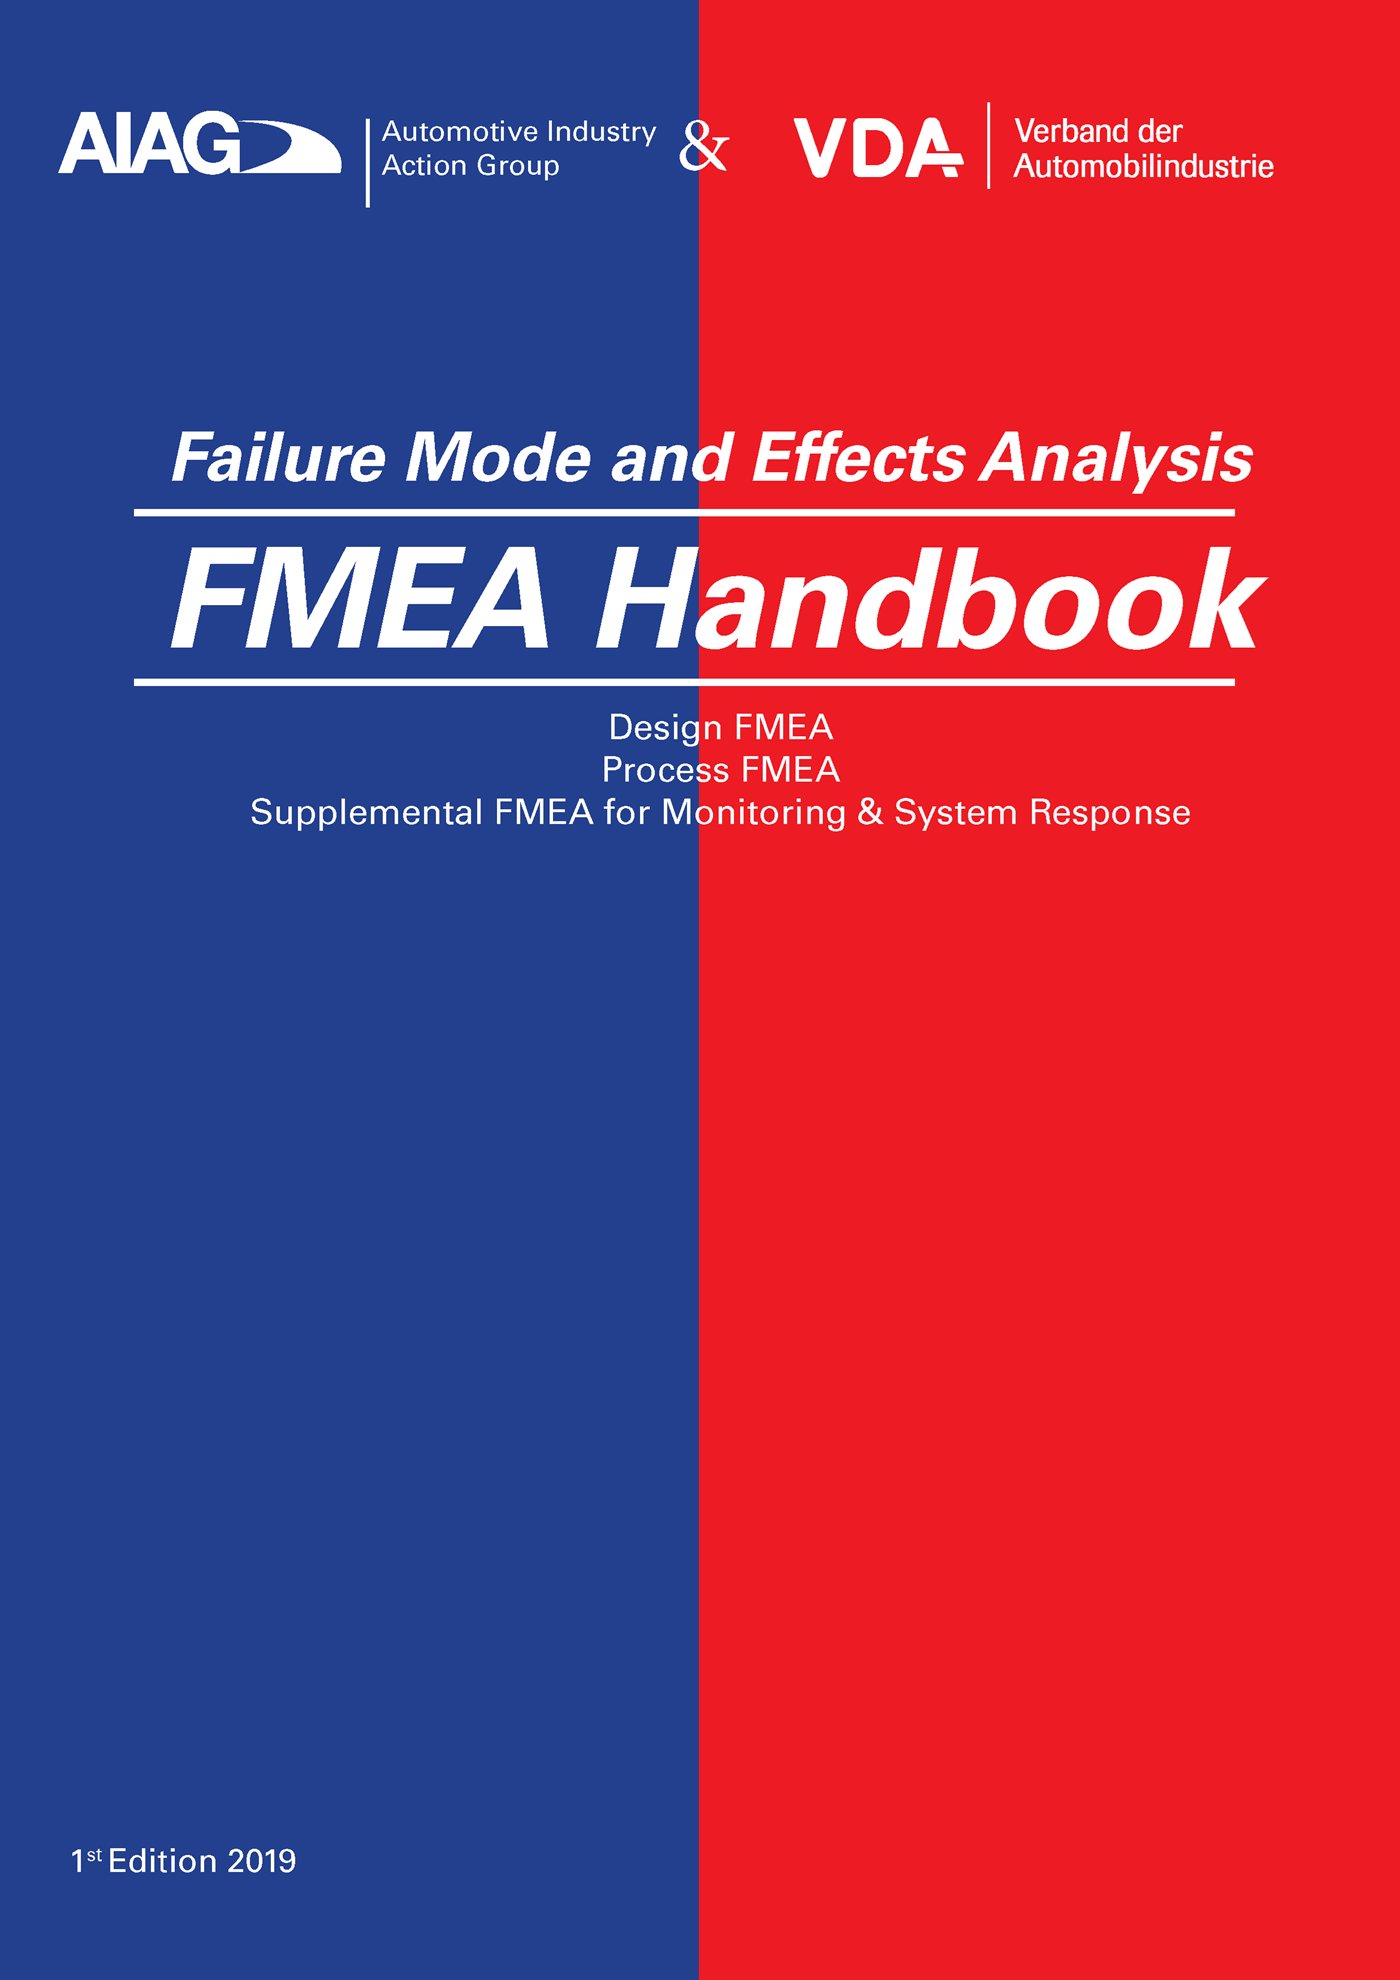 Náhľad  VDA AIAG & VDA FMEA-Handbook
 Design FMEA, Process FMEA, 
 Supplemental FMEA for Monitoring & System Response
 First Edition Issued June 2019 1.1.2019